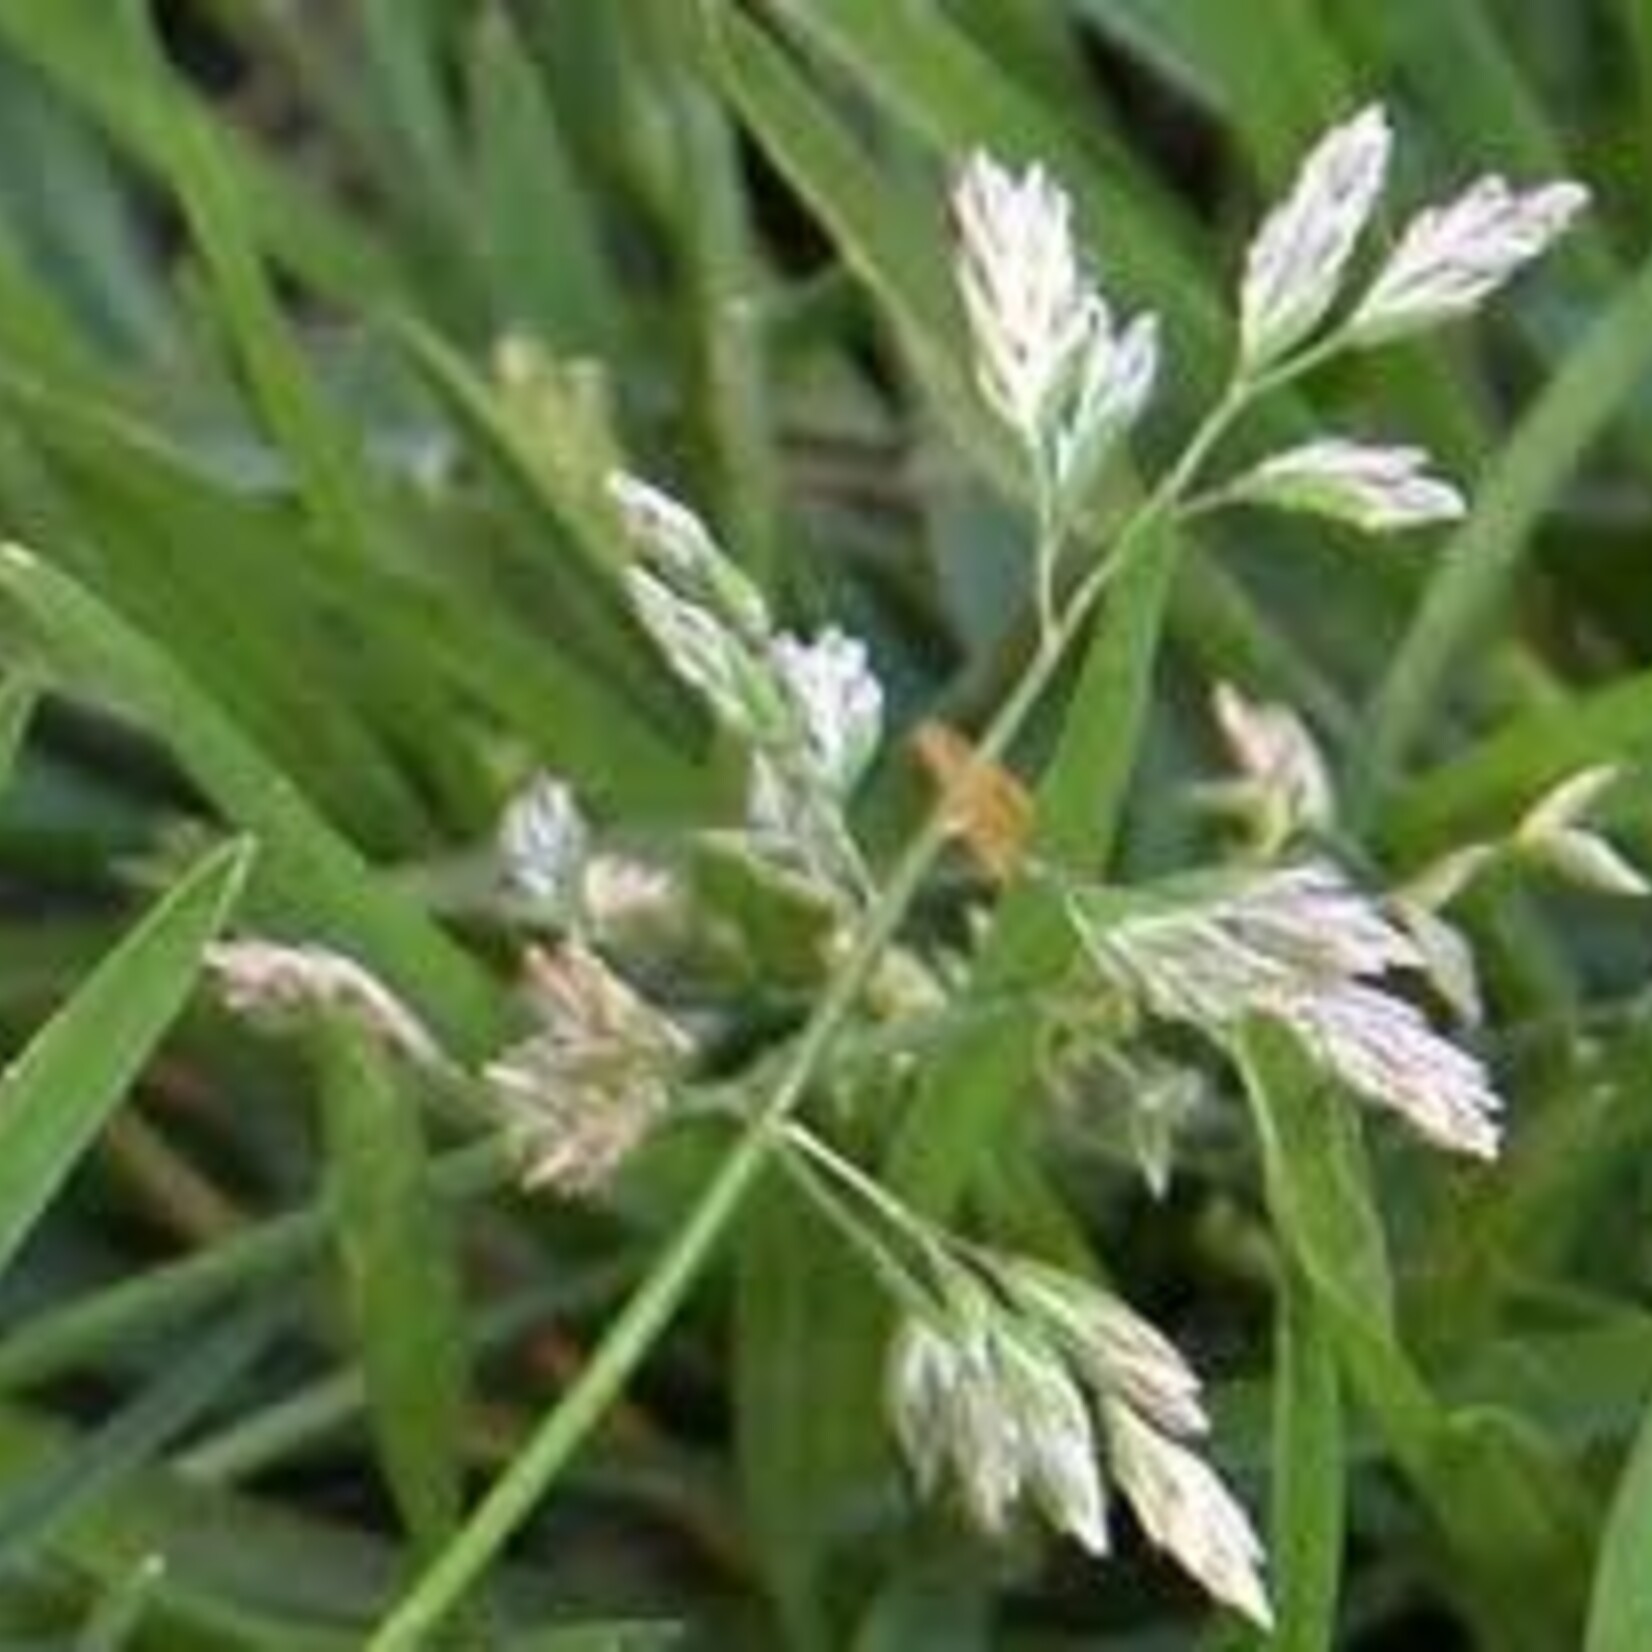 Weed, Poa annua, grassy weed